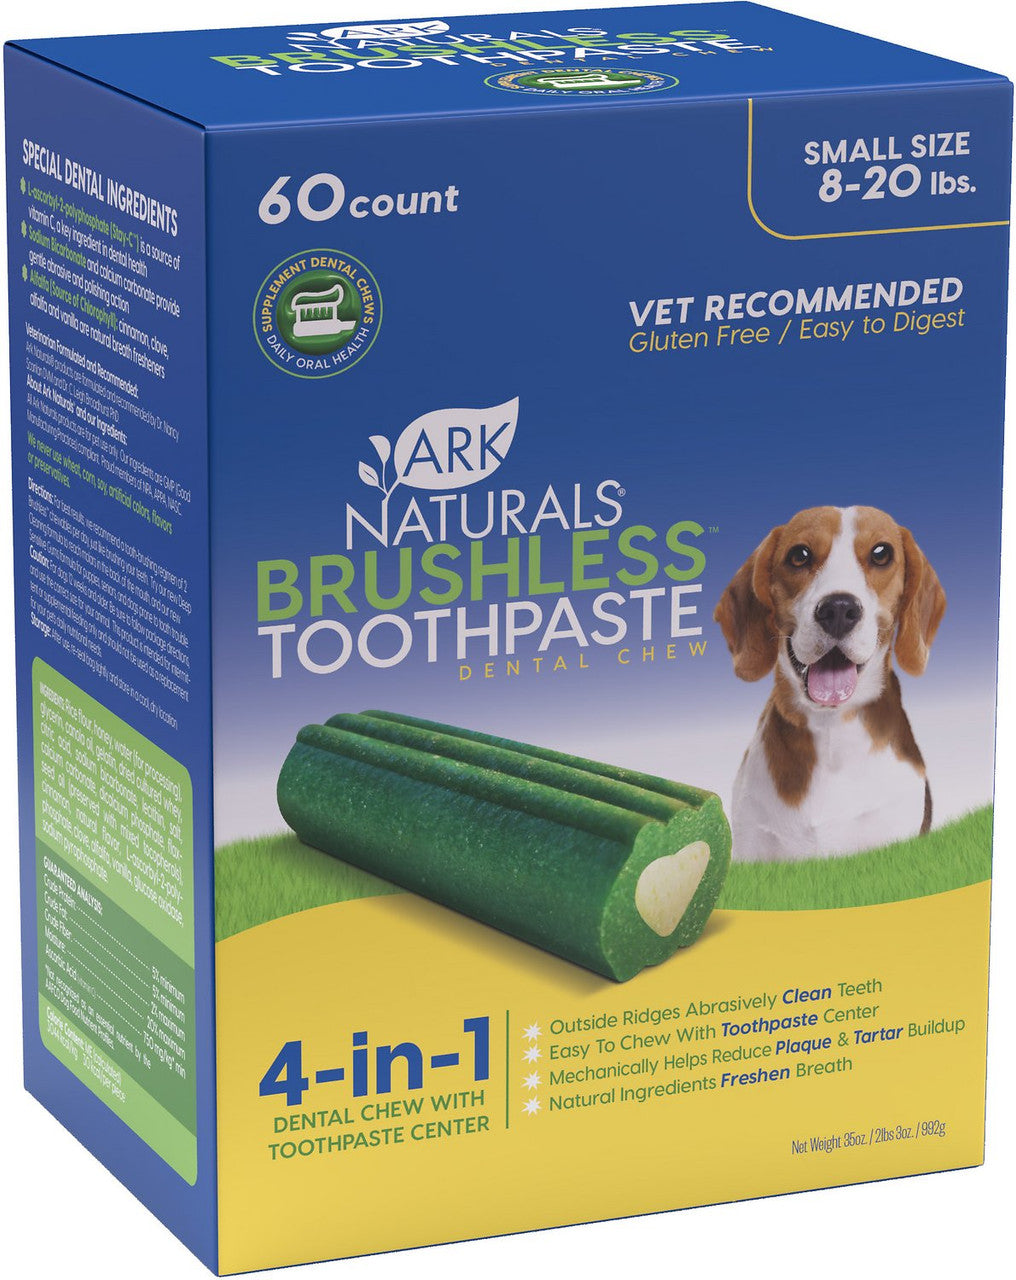 Ark Naturals Brushless Toothpaste Value Pack Small 60CT {L-1}326134 632634410001